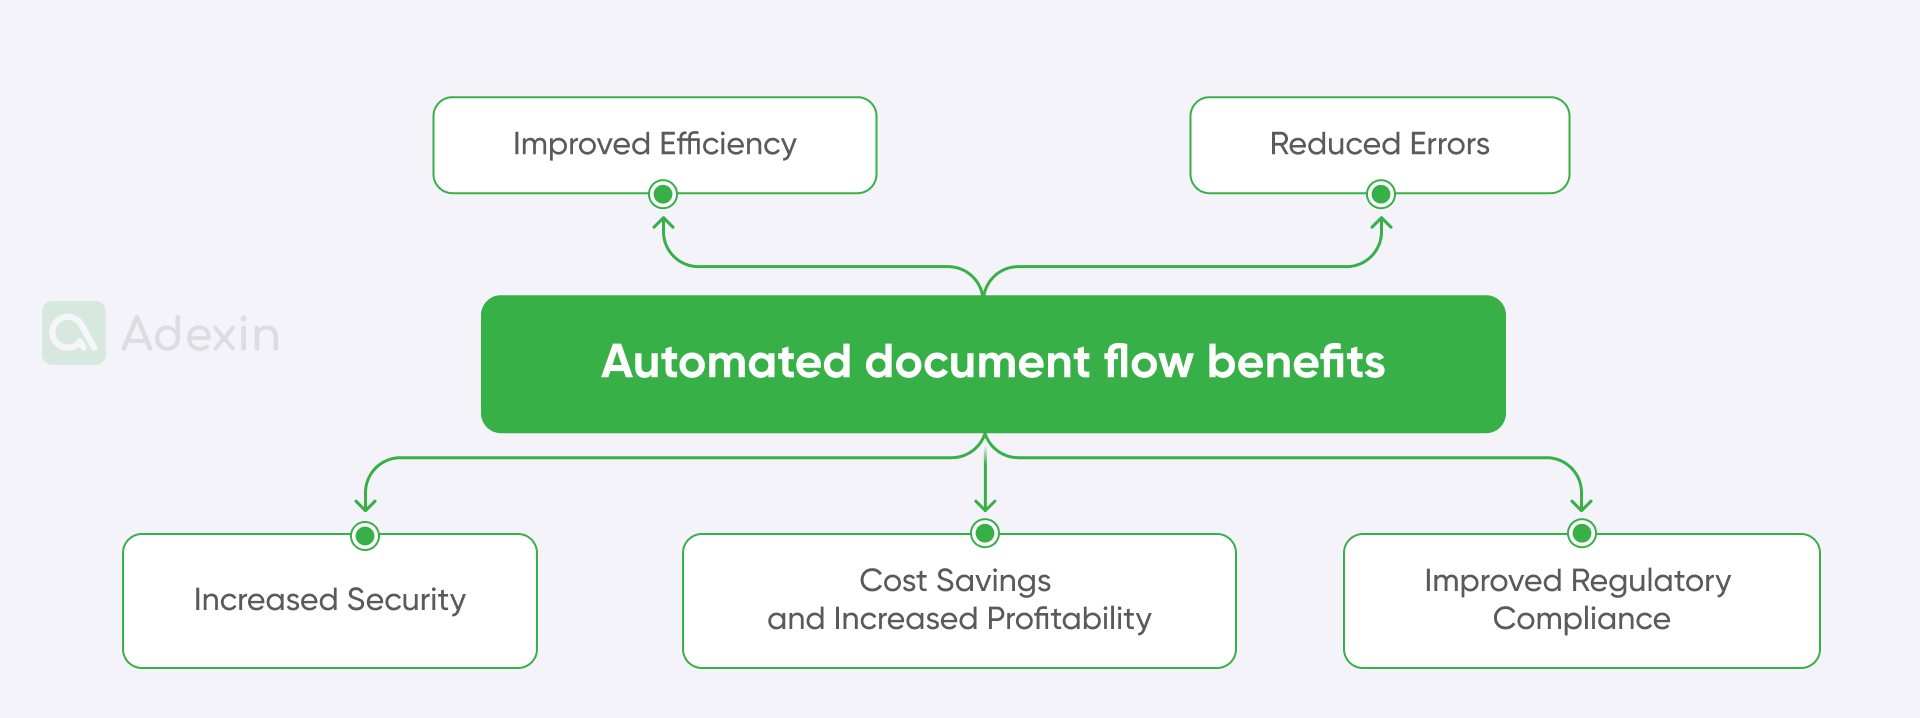 Benefits of using automated document flow in transportation